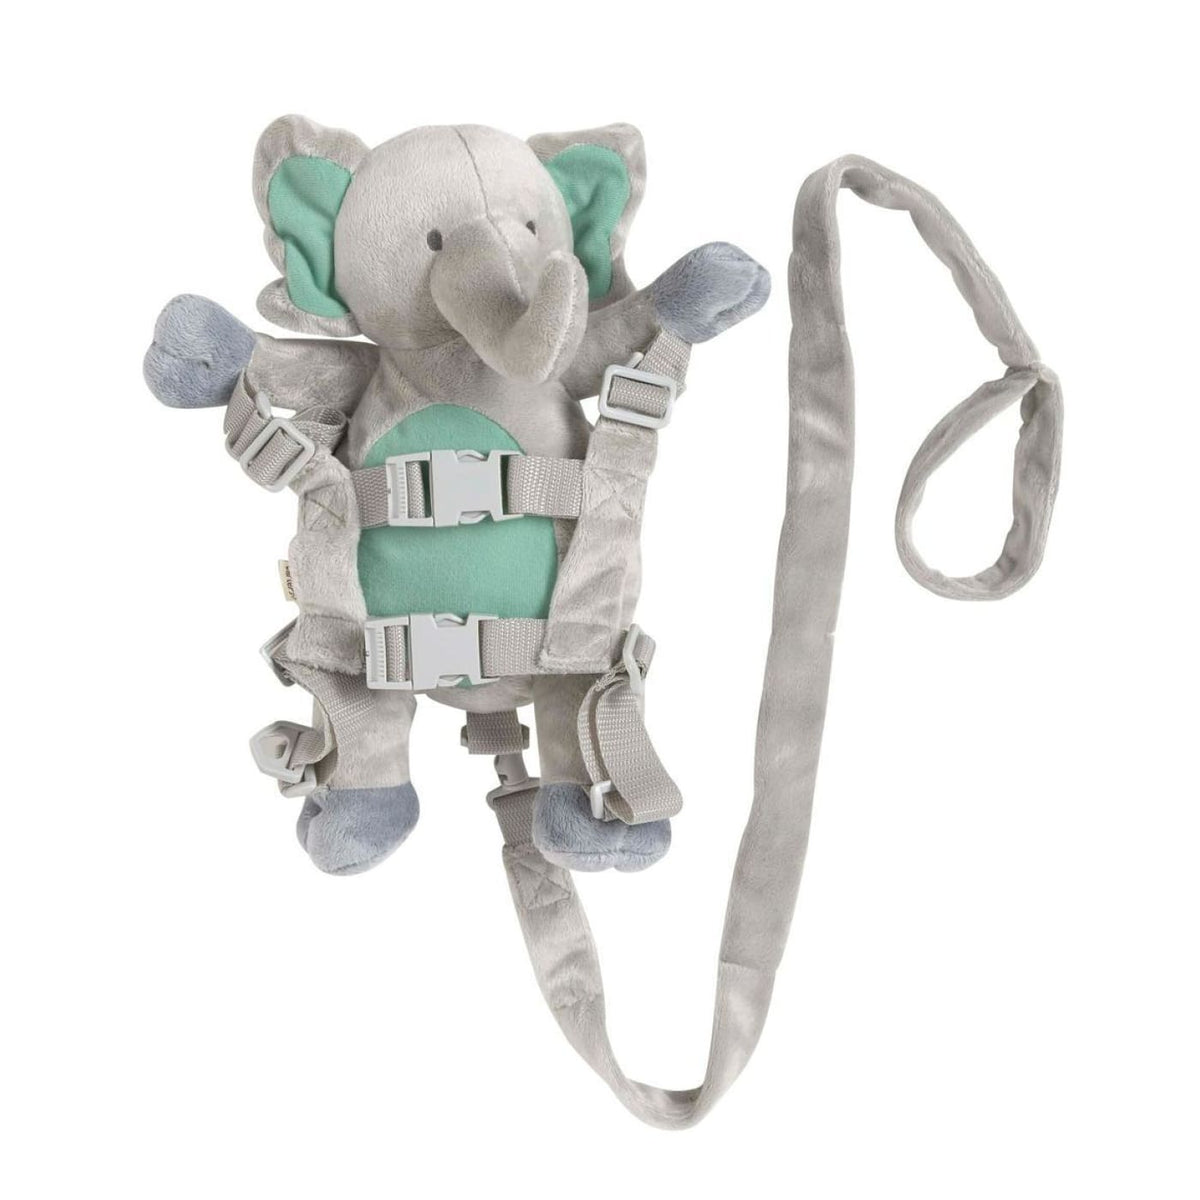 Playette 2 in 1 Harness Buddy - Gatsby Elephant - ON THE GO - SAFETY HARNESSES